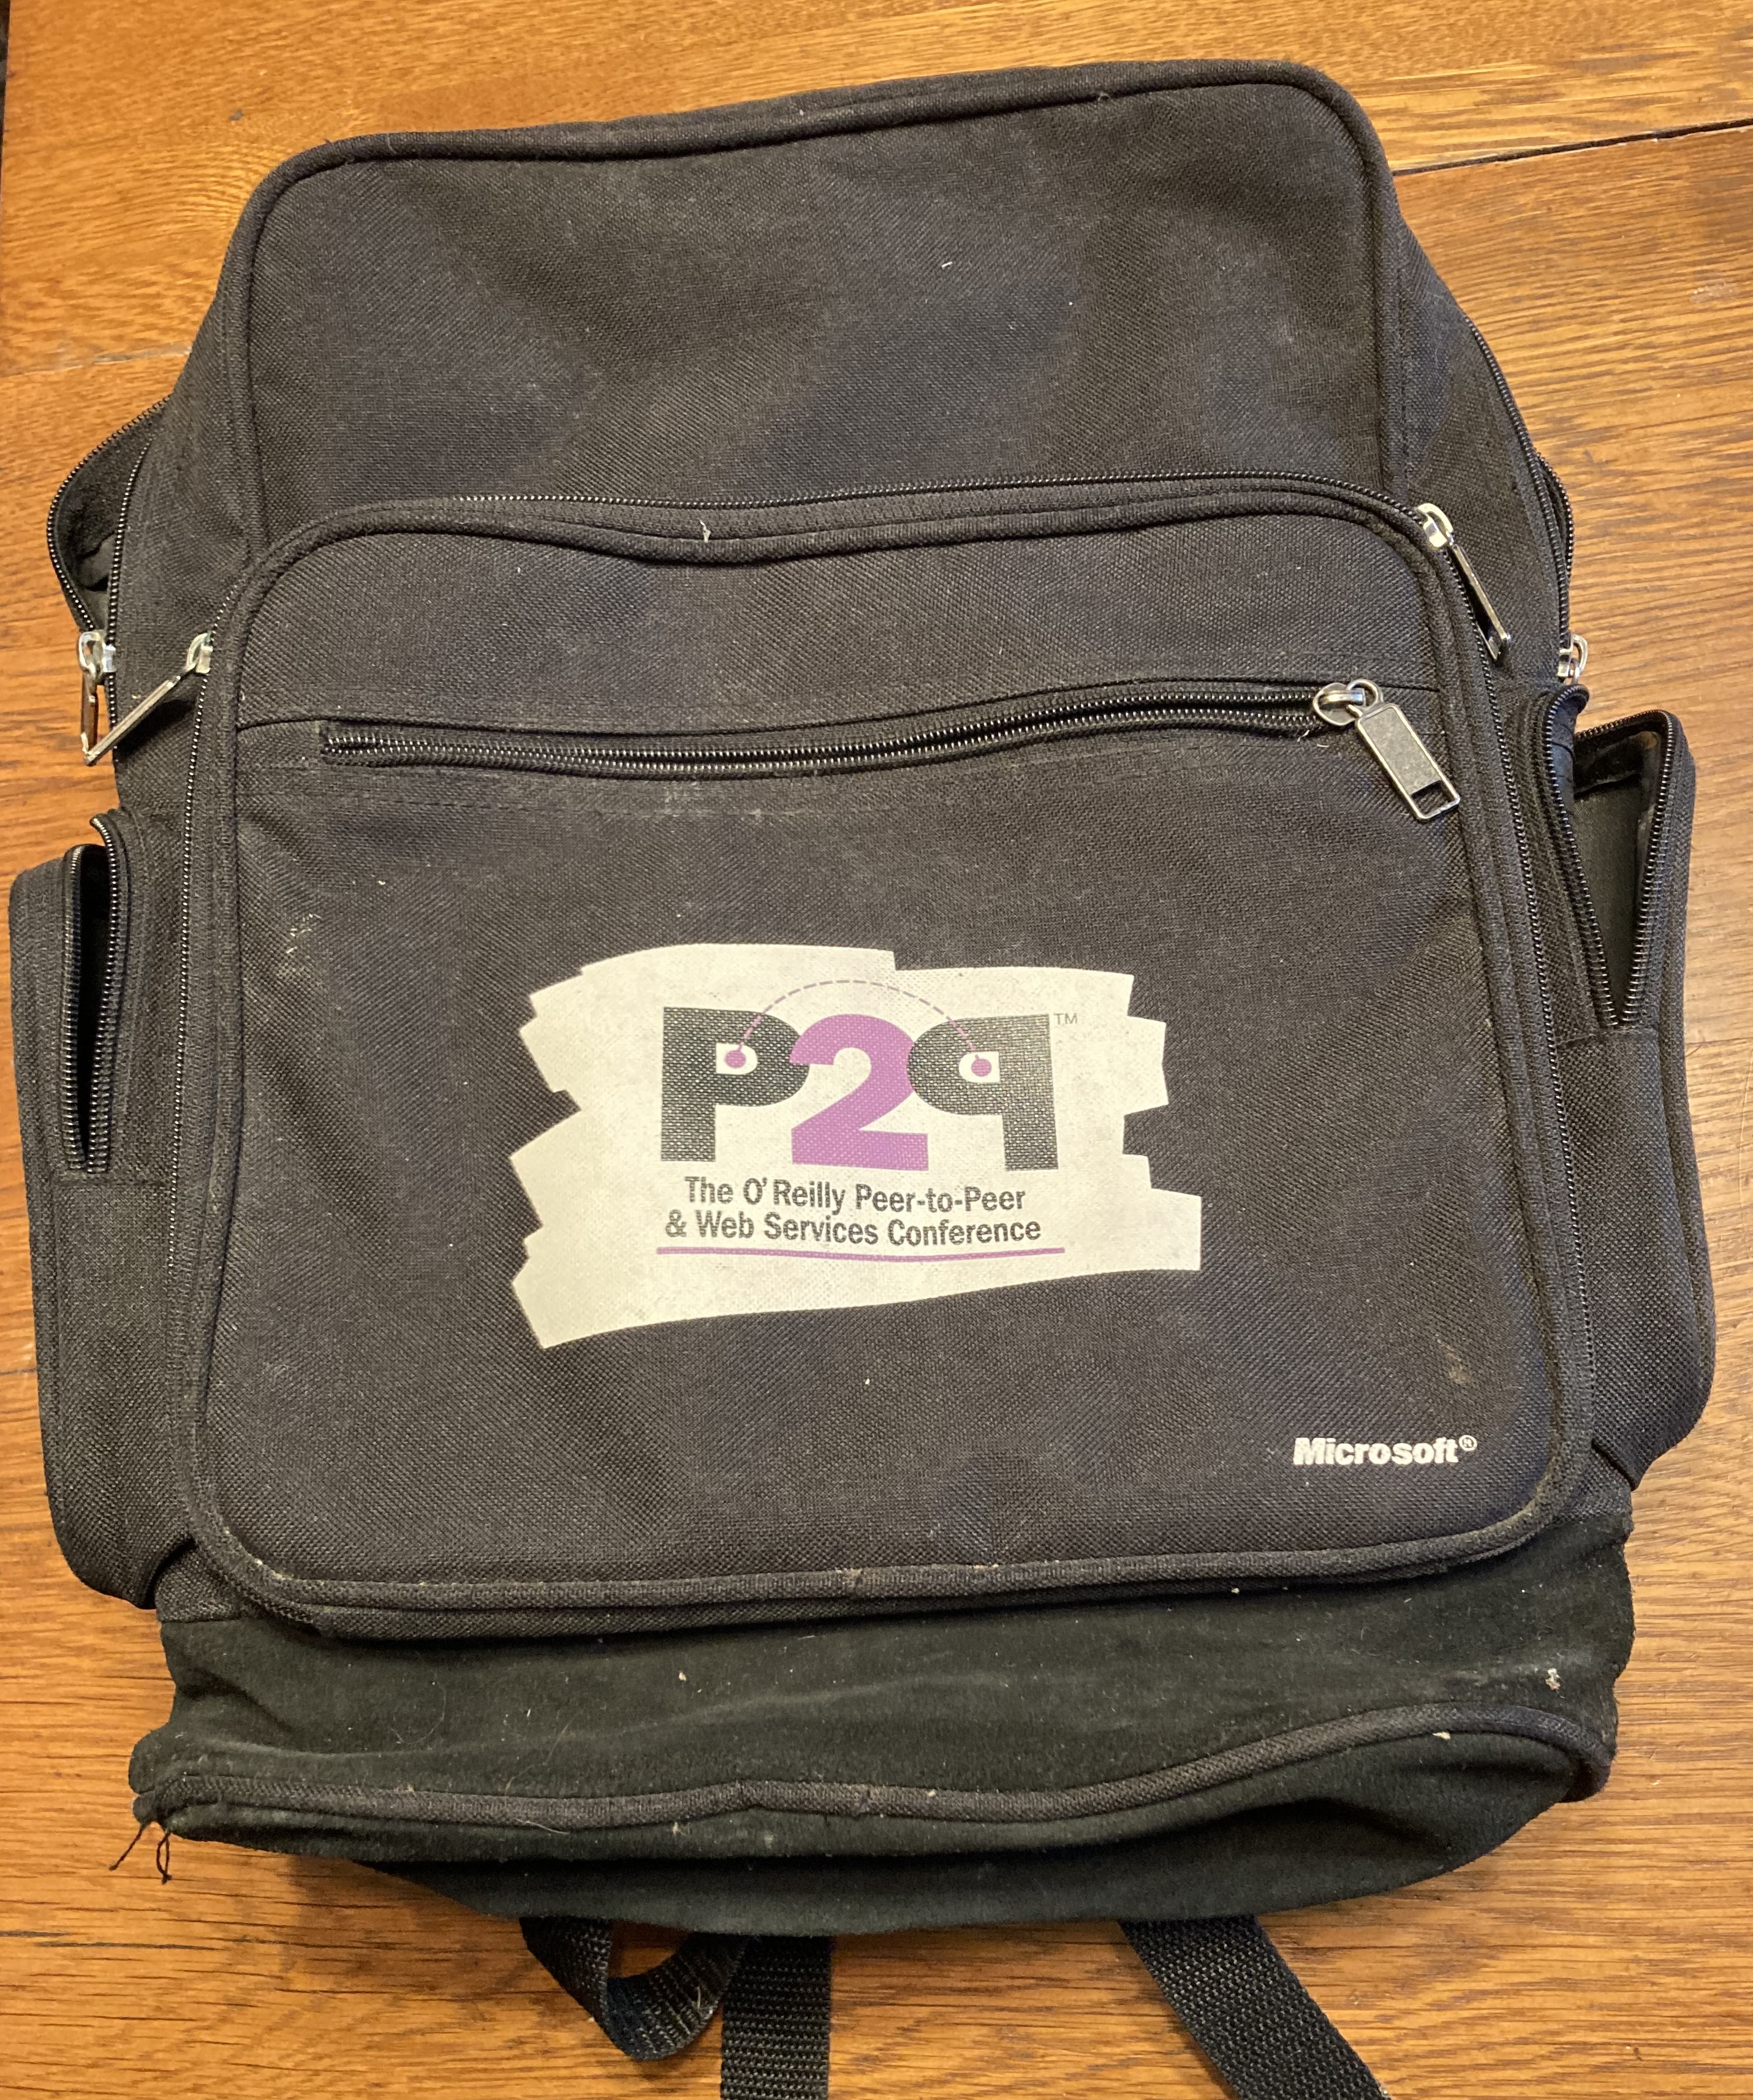 A backpack handed out as swag at the Peer-to-Peer conference in February 2001 shows \